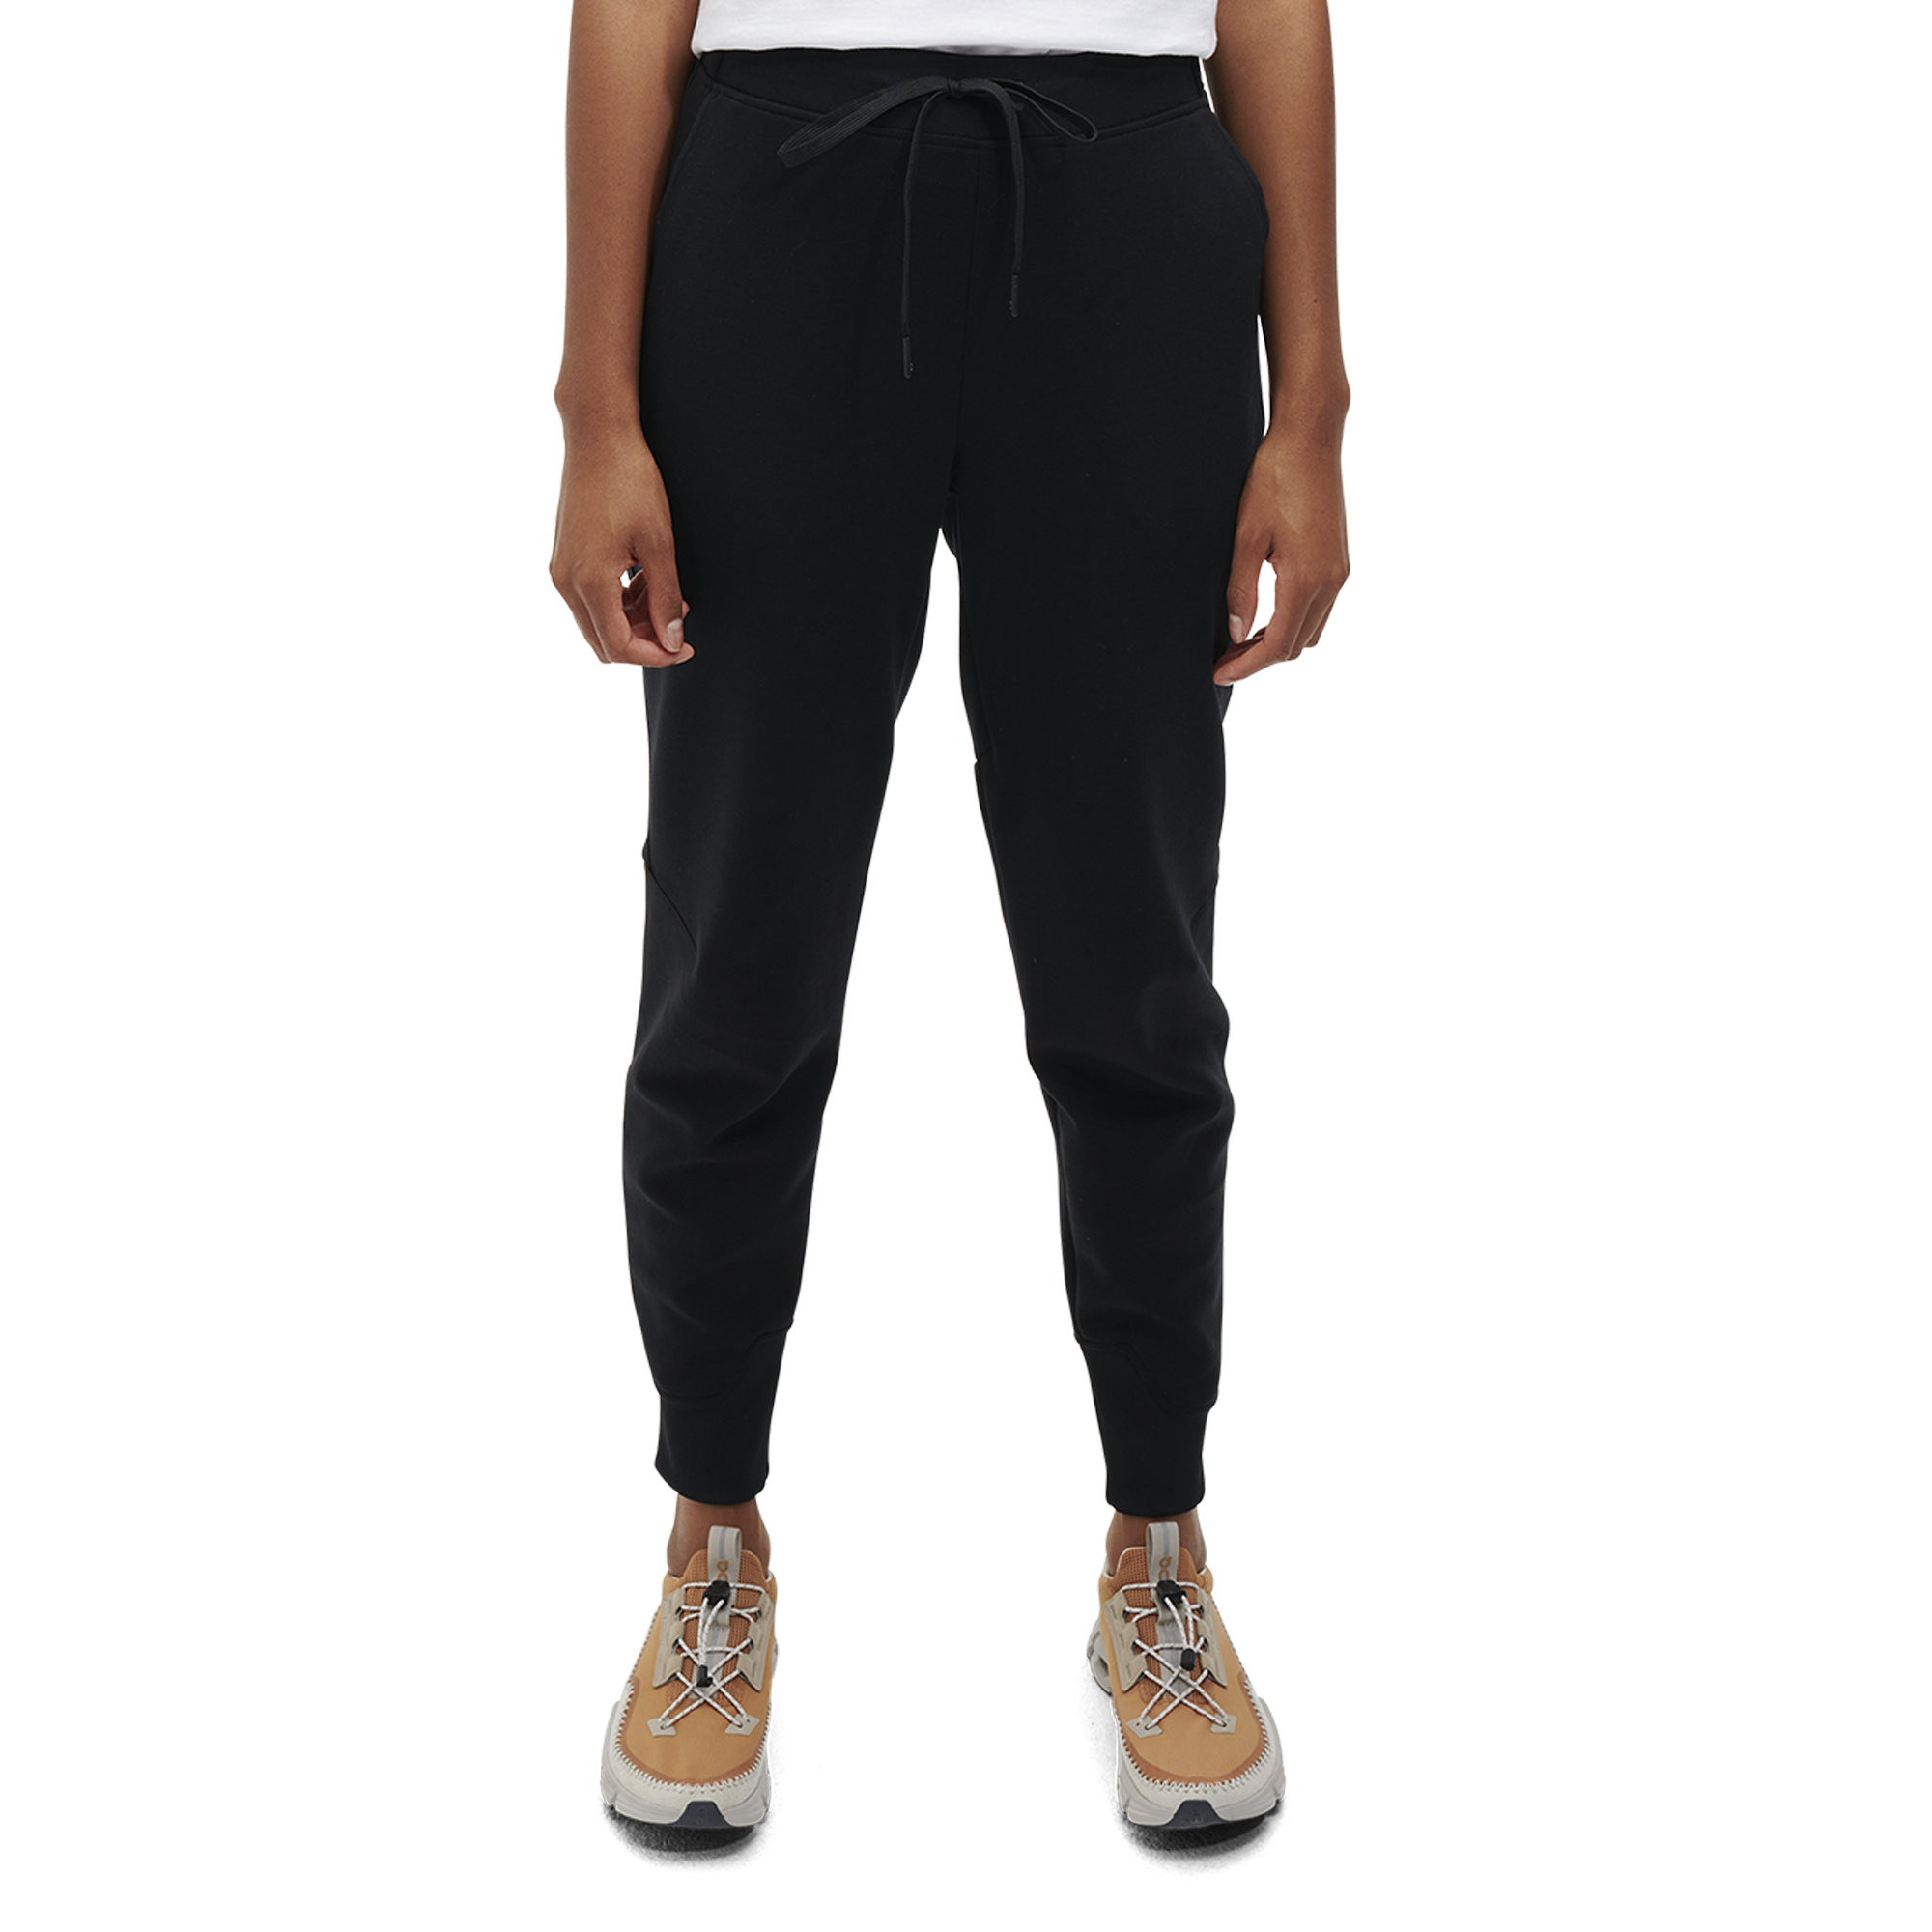 On Sweat Pants Black Women Women – Recovery, pre- or post-workout, soft comfort Pants